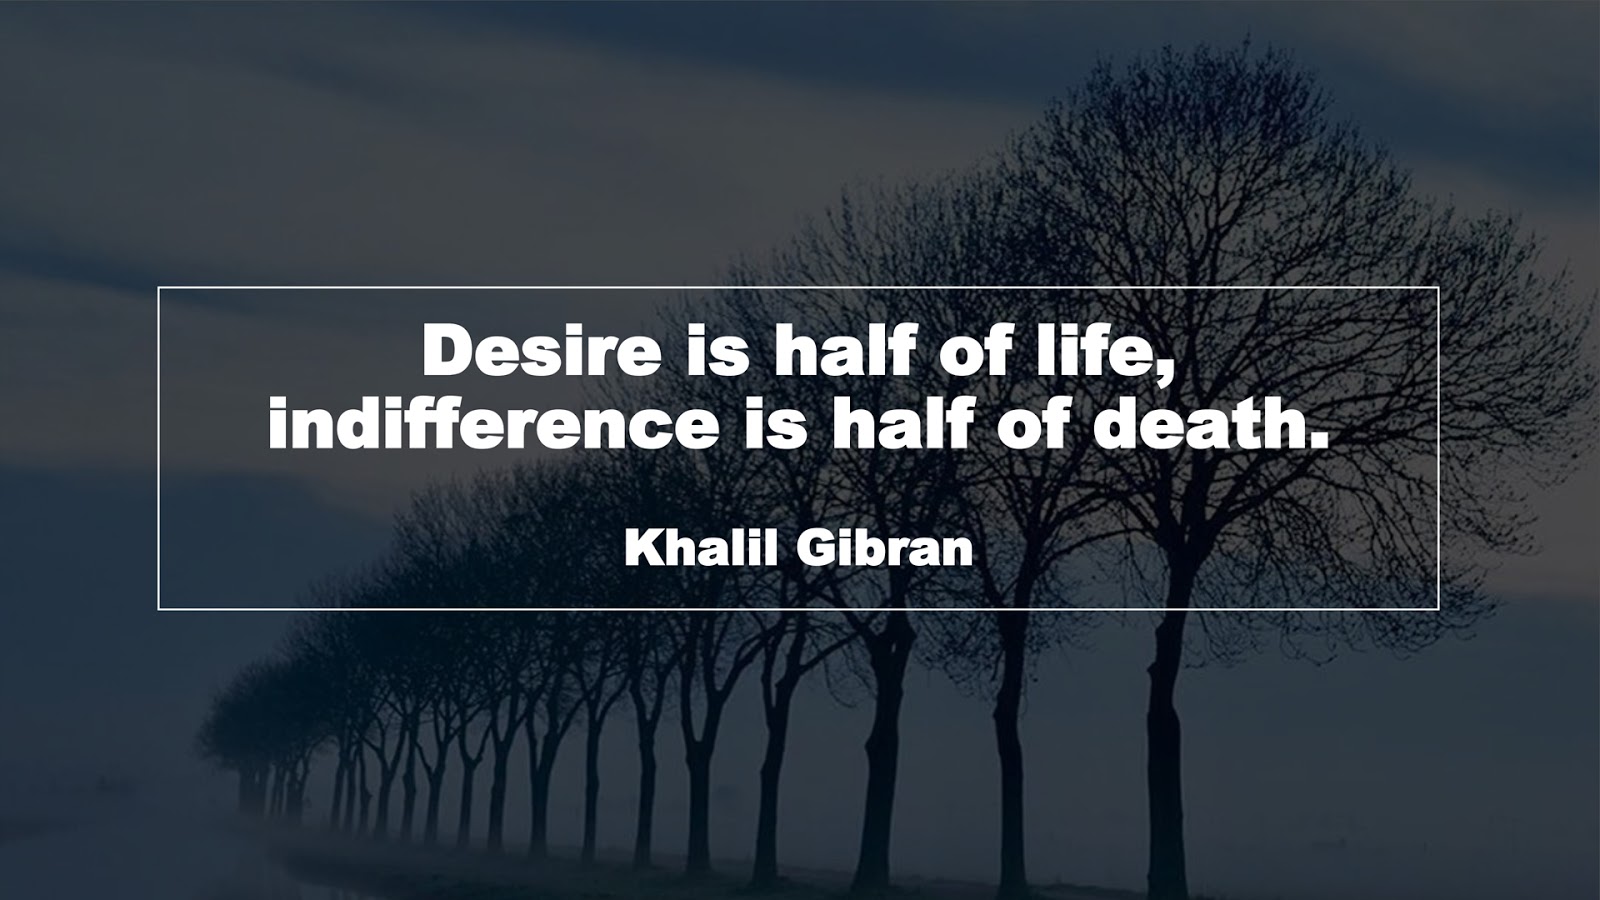 Desire is half of life, indifference is half of death. (Khalil Gibran)